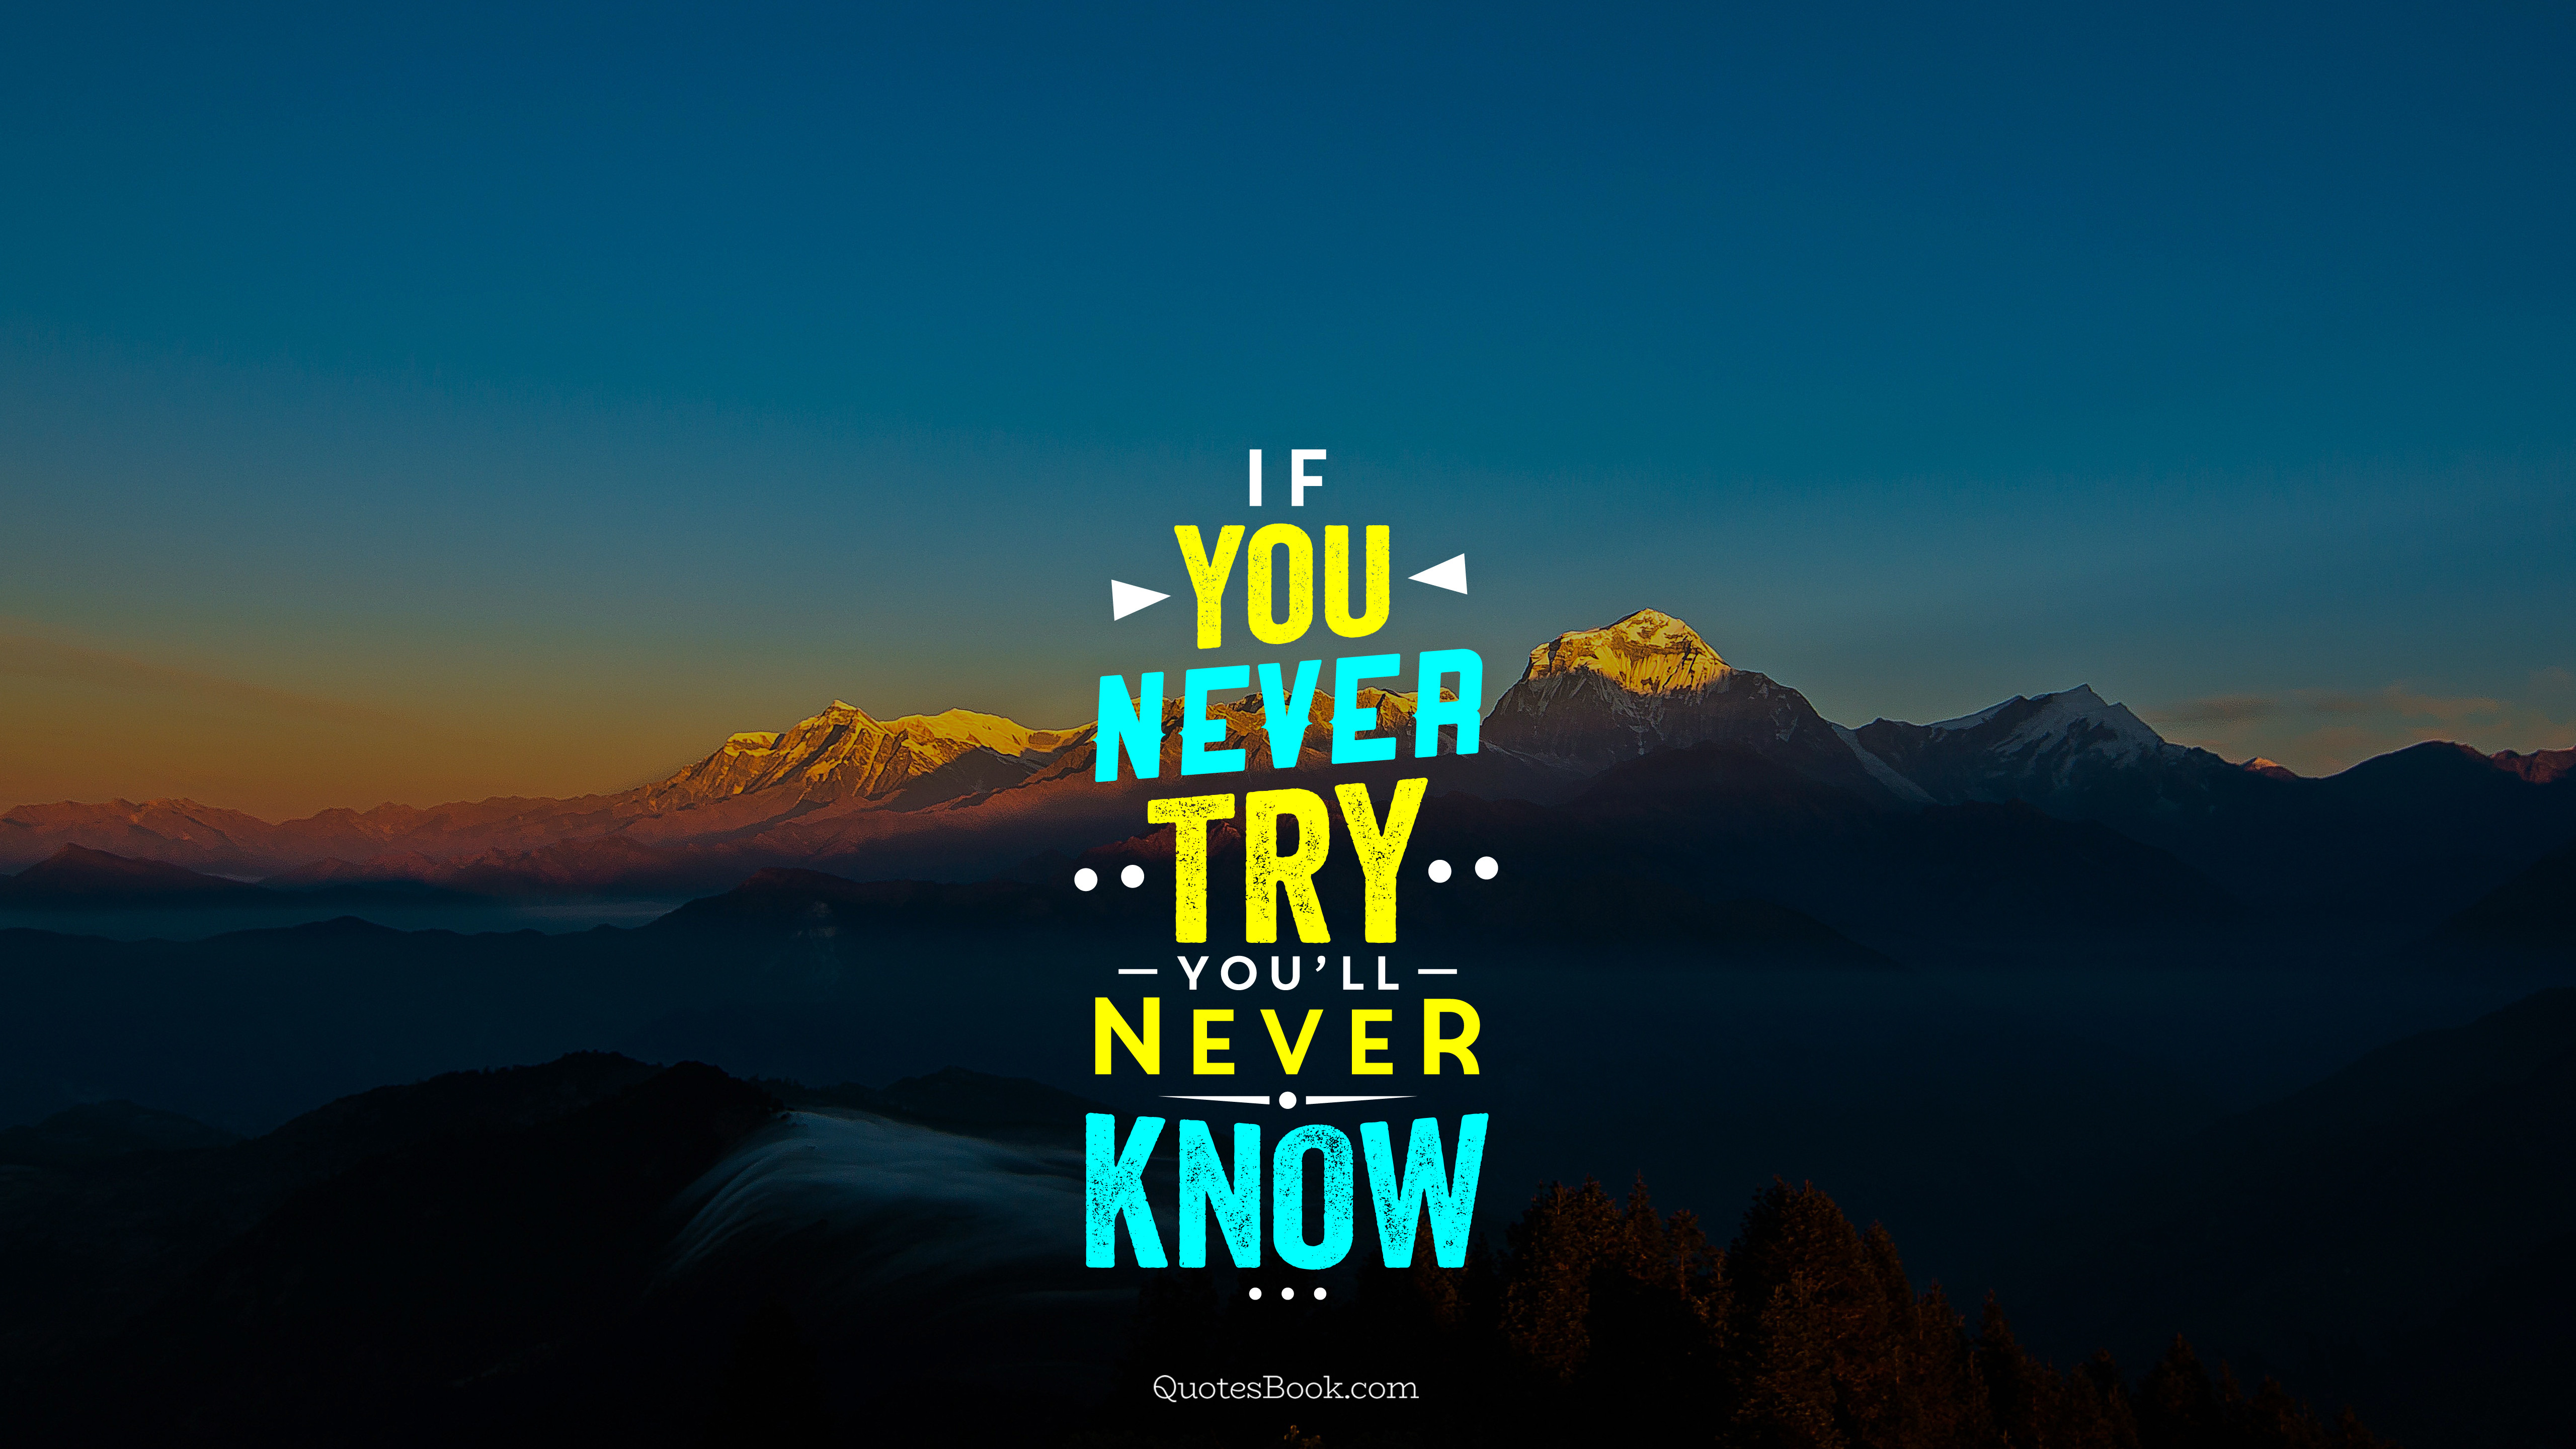 If you never try you'll never know - QuotesBook